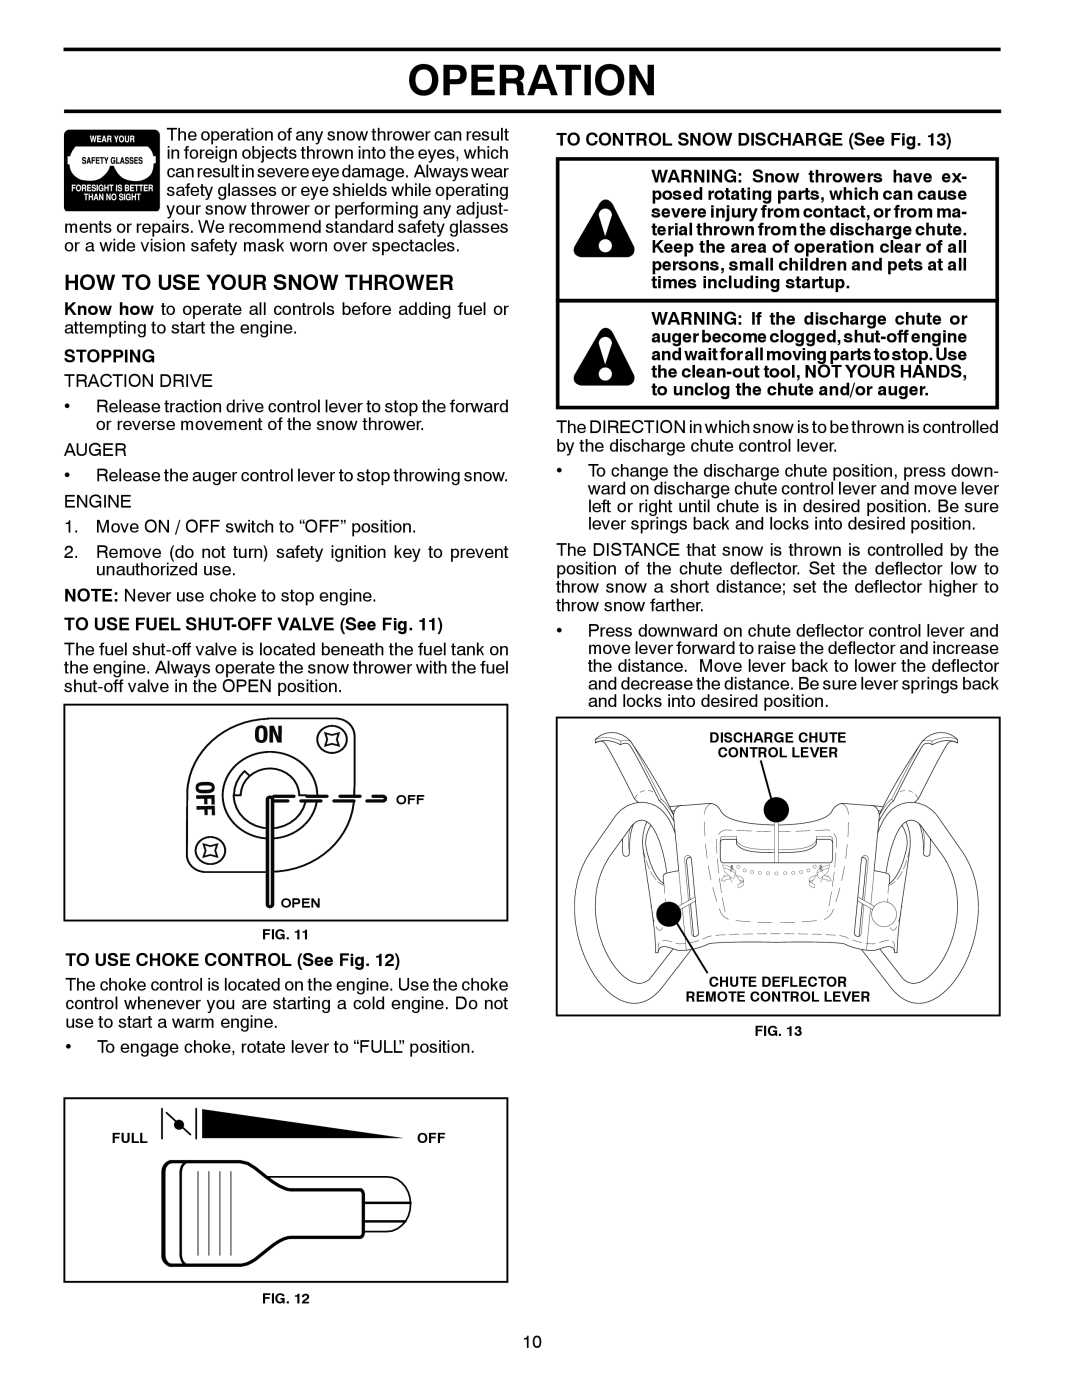 Husqvarna 96193005200, 924HV manual How To Use Your Snow Thrower, Operation, Stopping, TO USE FUEL SHUT-OFF VALVE See Fig 